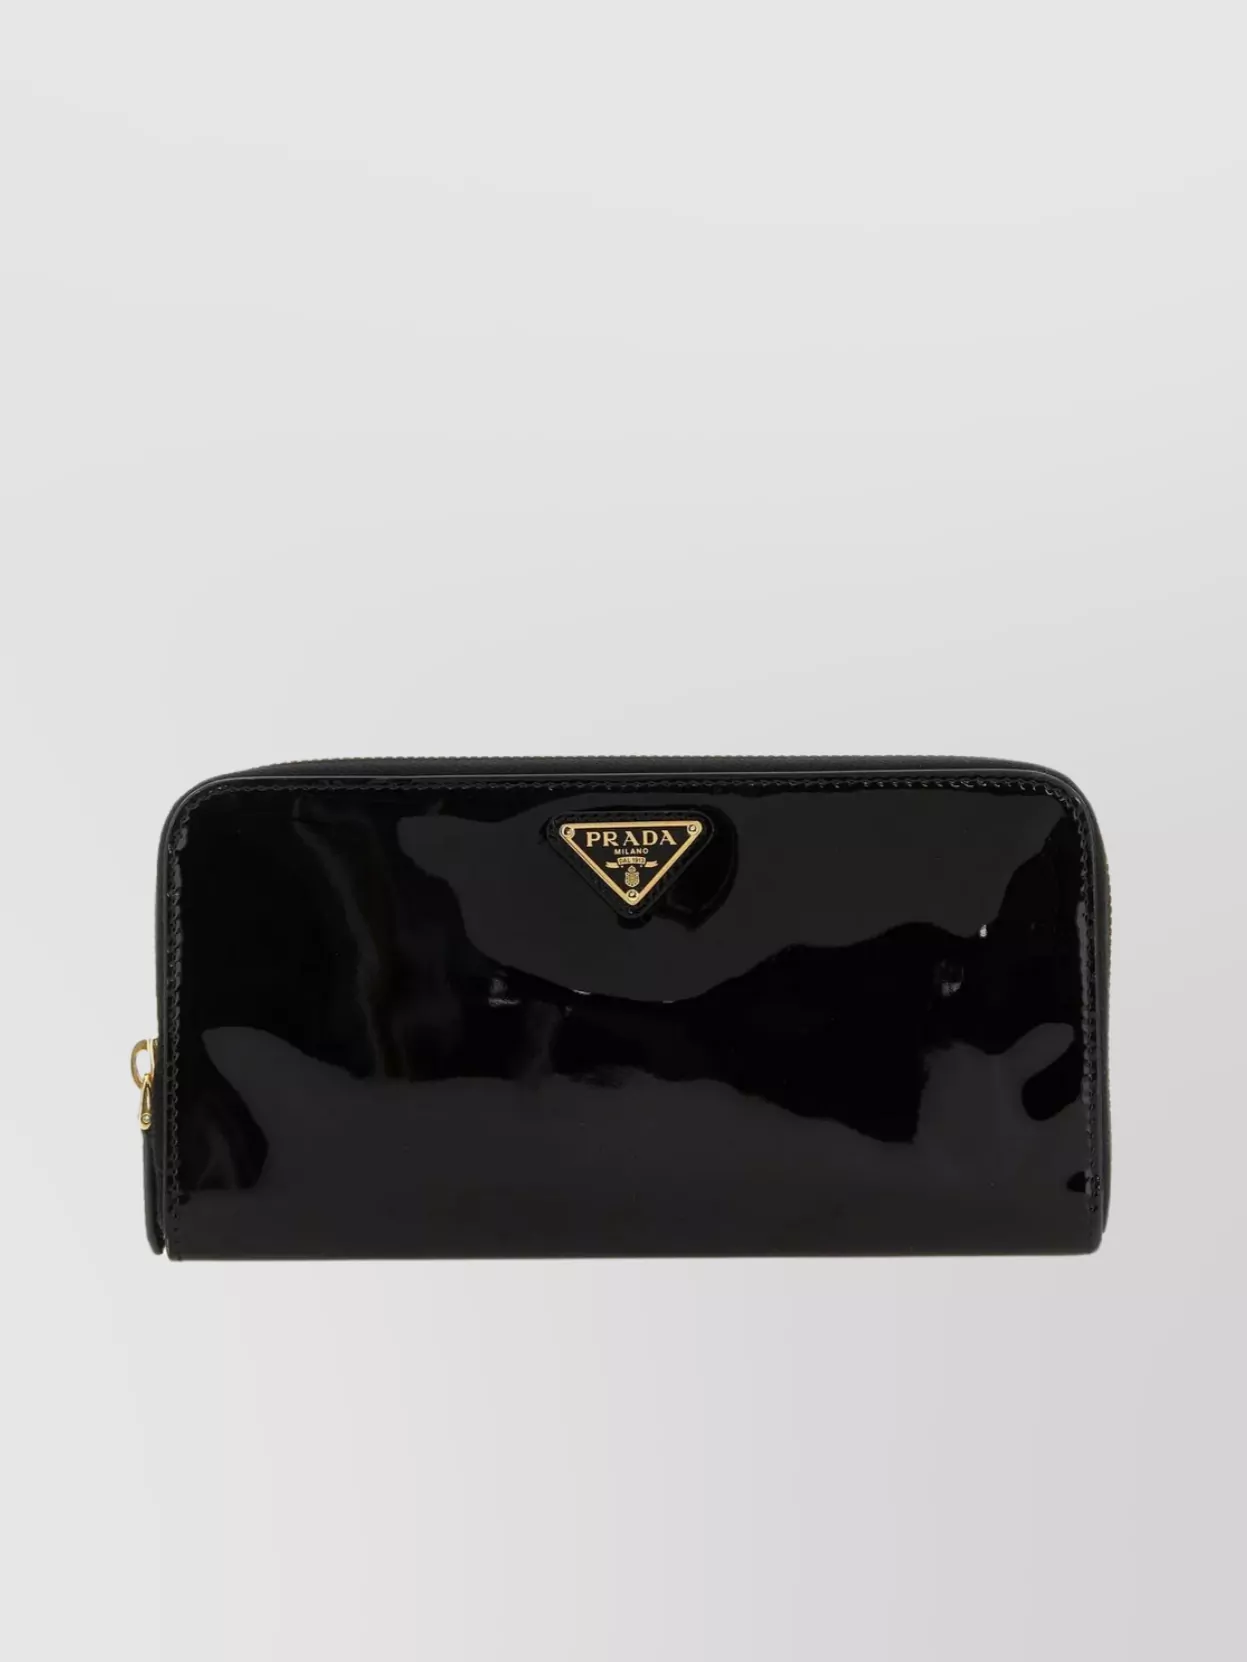 Prada Leather Wallet With Glossy Finish And Gold Hardware In Black